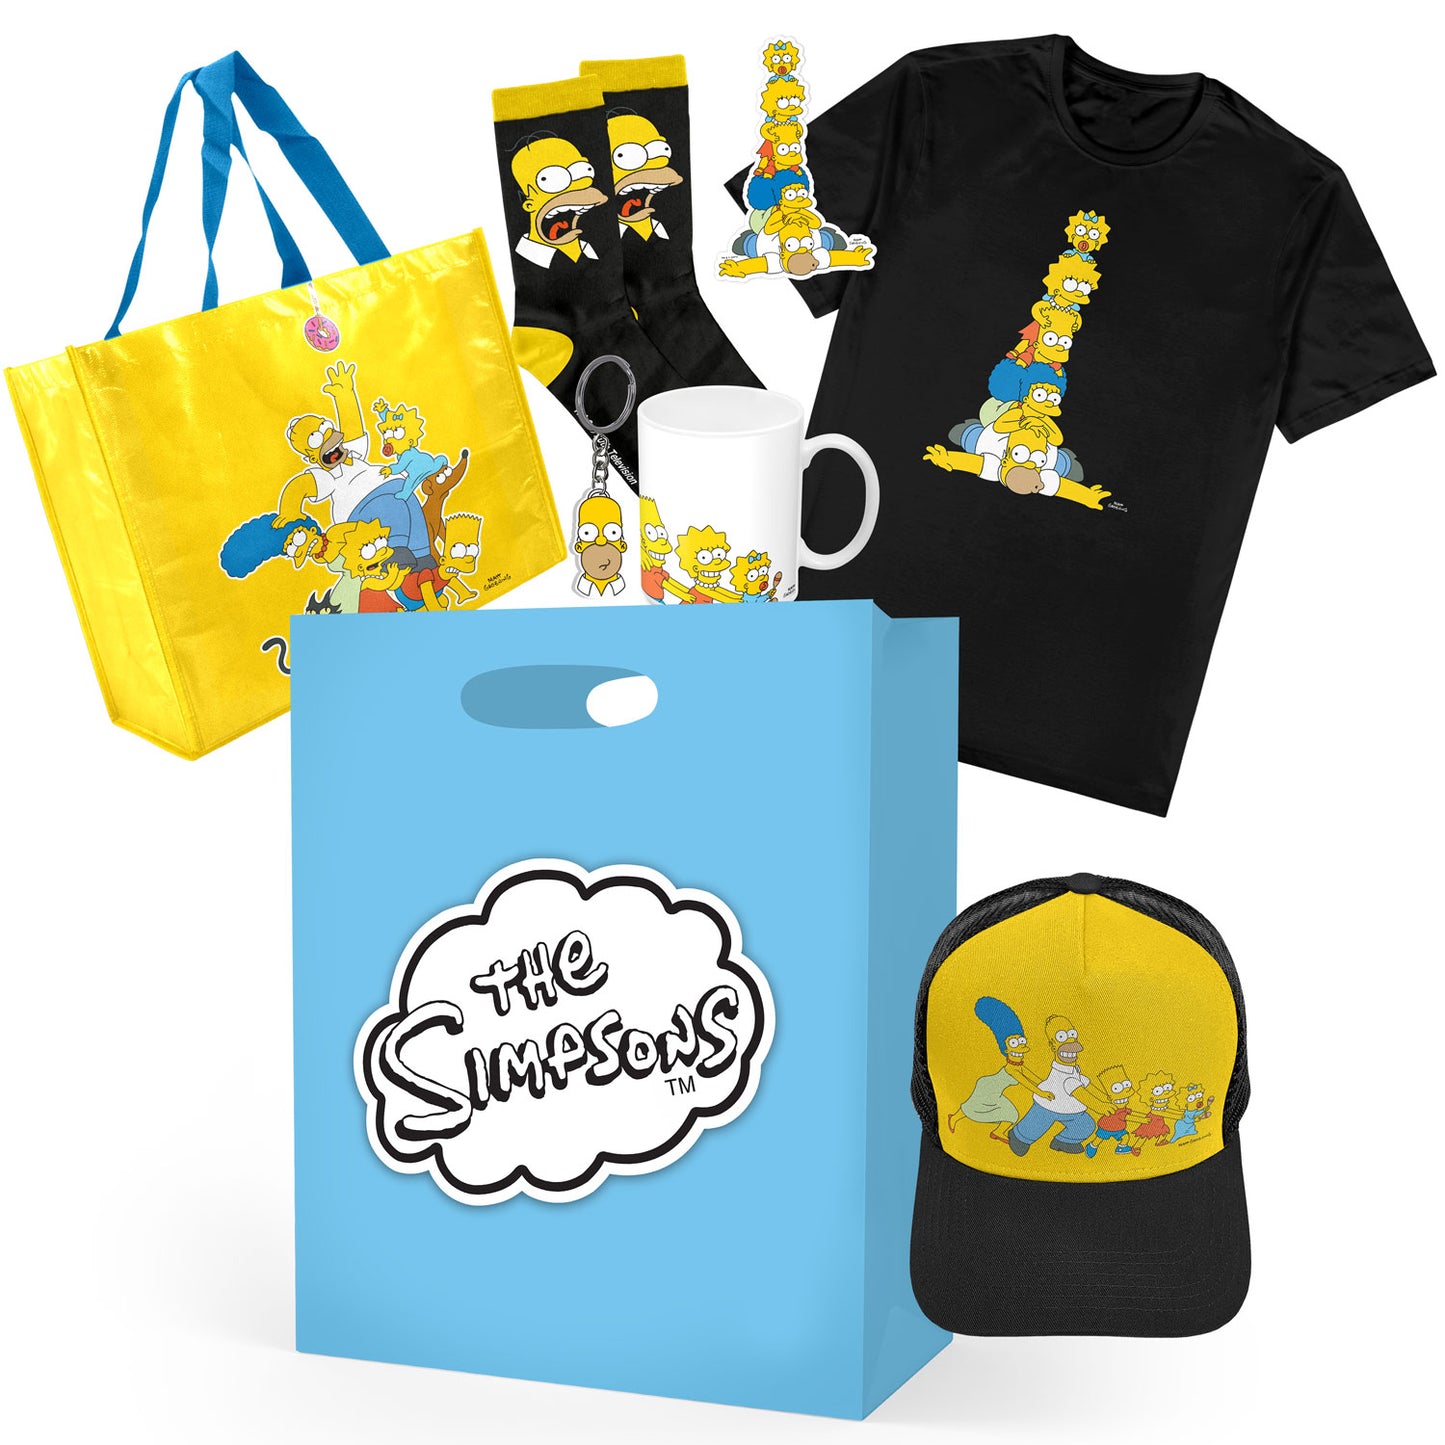 The Simpsons with T-Shirt Showbag